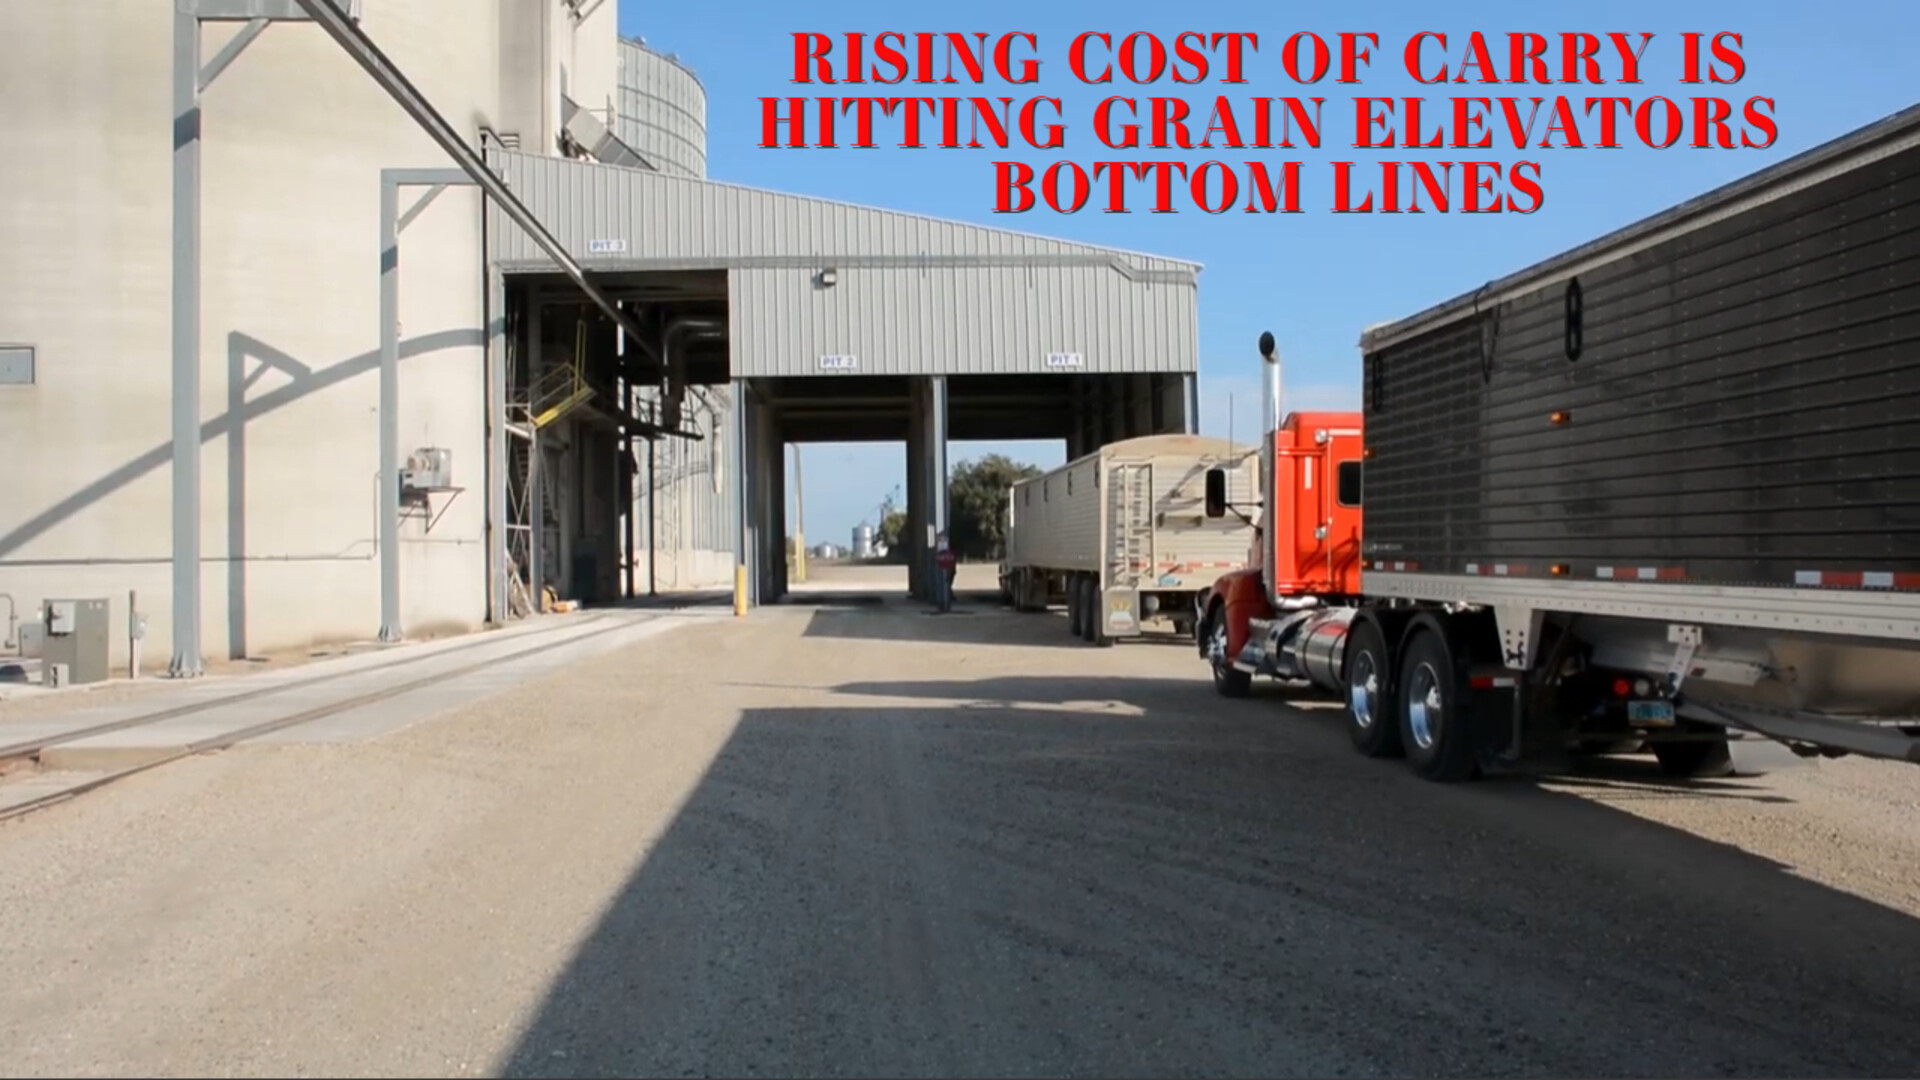 Rising Cost of Carry is Hitting Grain Elevators Bottom Lines